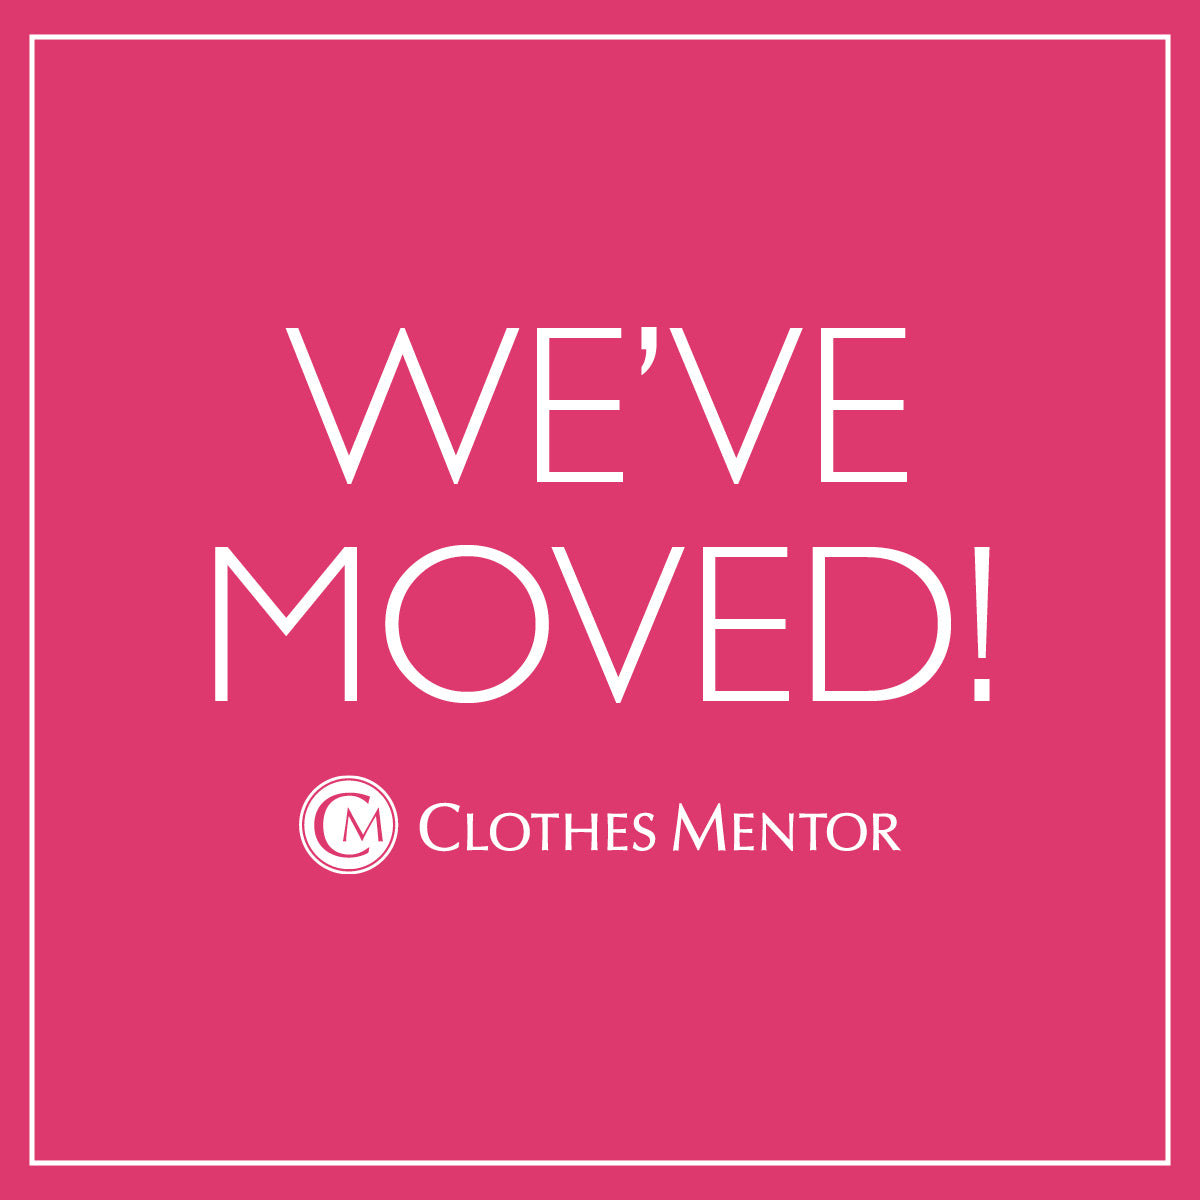 Clothes Mentor Knoxville has moved